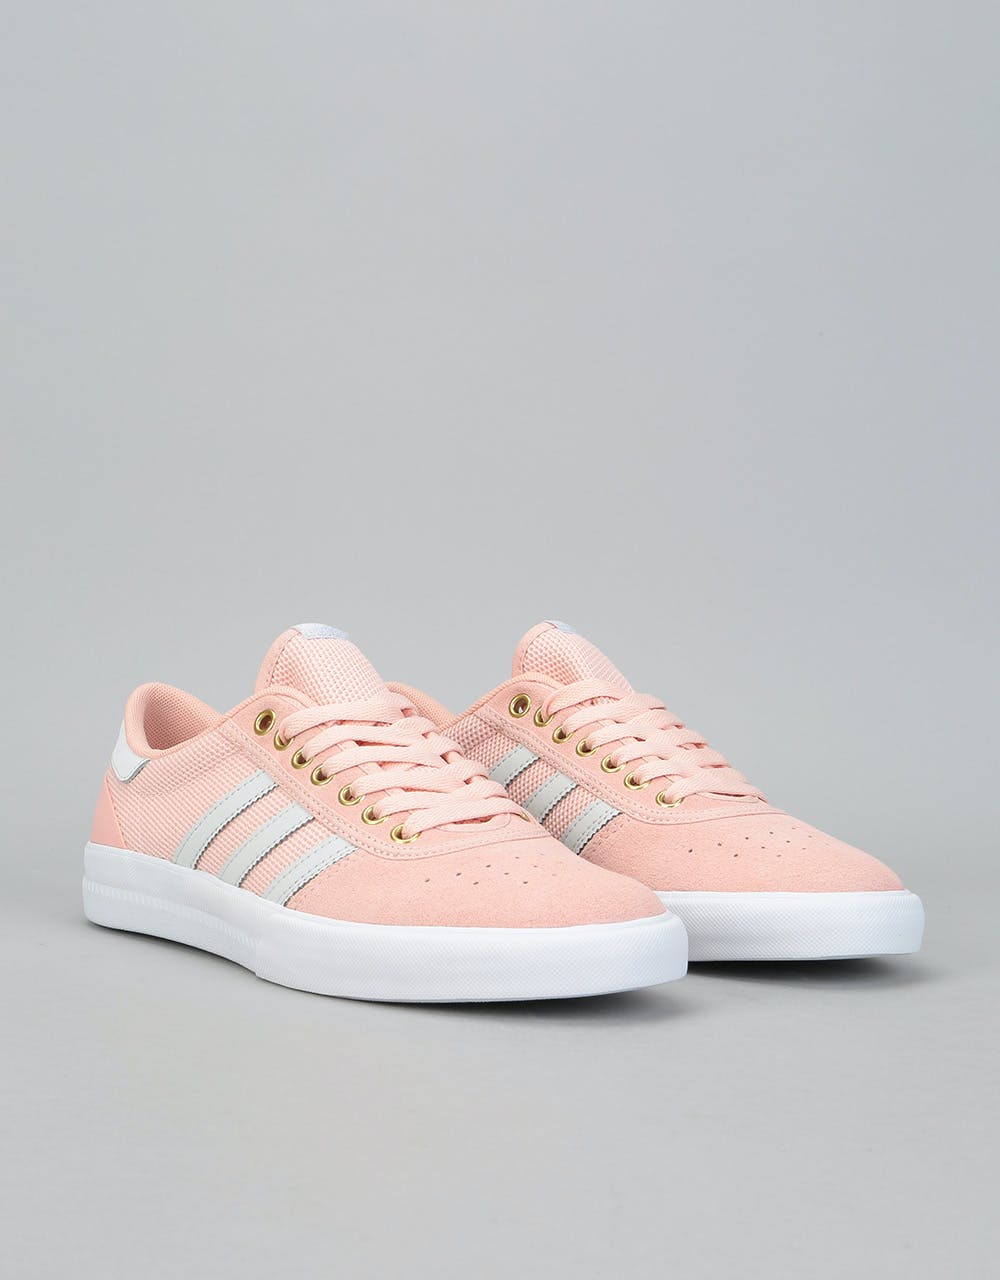 Adidas Lucas Premiere Skate Shoes - Vapour Pink/Grey One/White